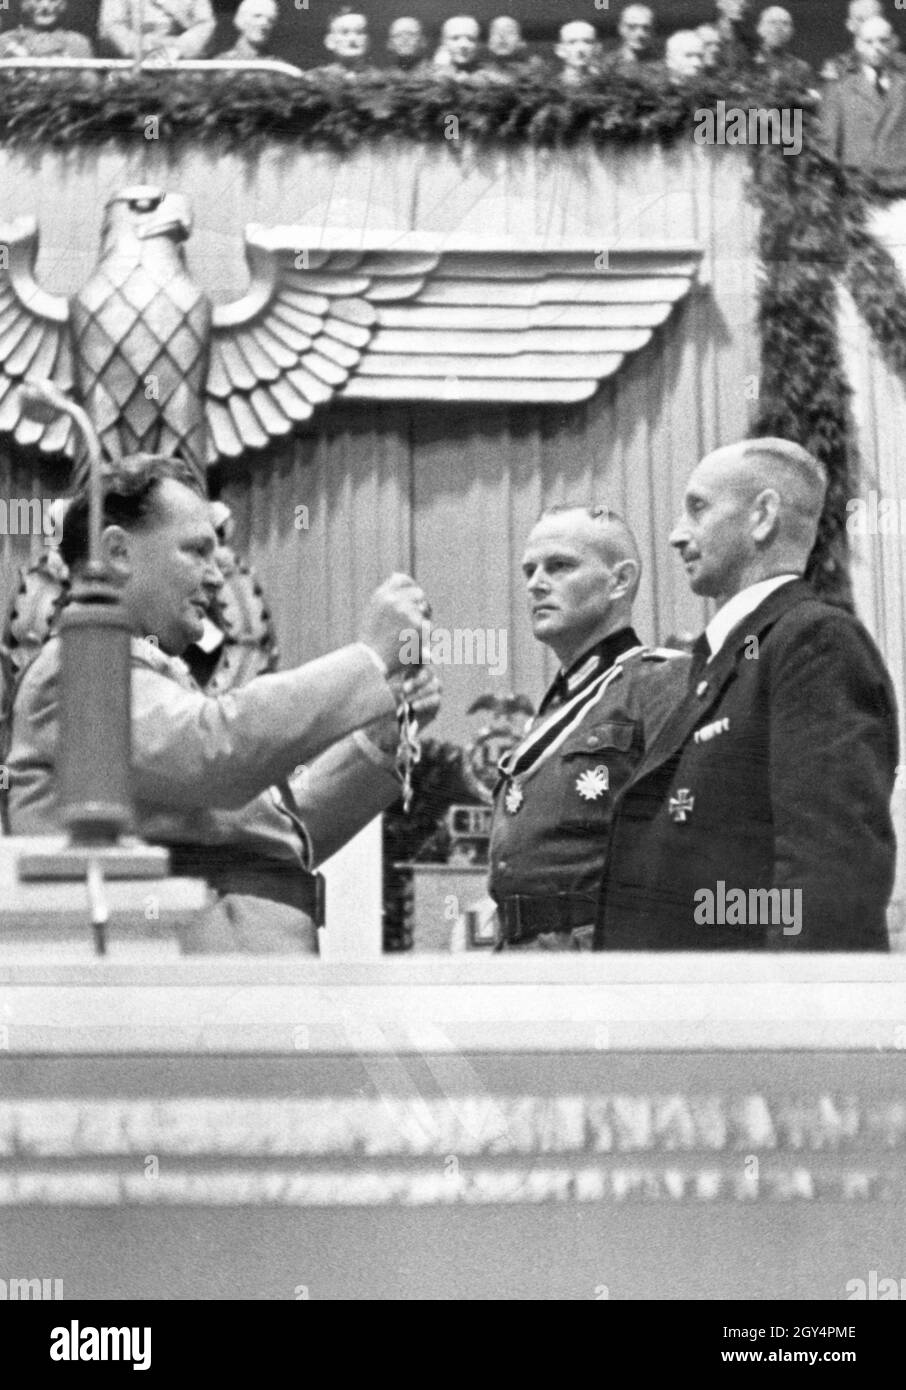 'On October 4, 1942, Thanksgiving Day, Reichsmarschall Hermann Göring (left) gave a ''Thanksgiving speech'' at the Sportpalast in Berlin-Schöneberg. In the speech he assured to secure food for the ''German people'' in the approaching winter. In the picture, Göring awards the Knight's Cross of the Order of Merit of the War to the farmer leader Ernst Ritter (black suit) and farmer leader Fritz Leffler (next to him on the left). [automated translation]' Stock Photo